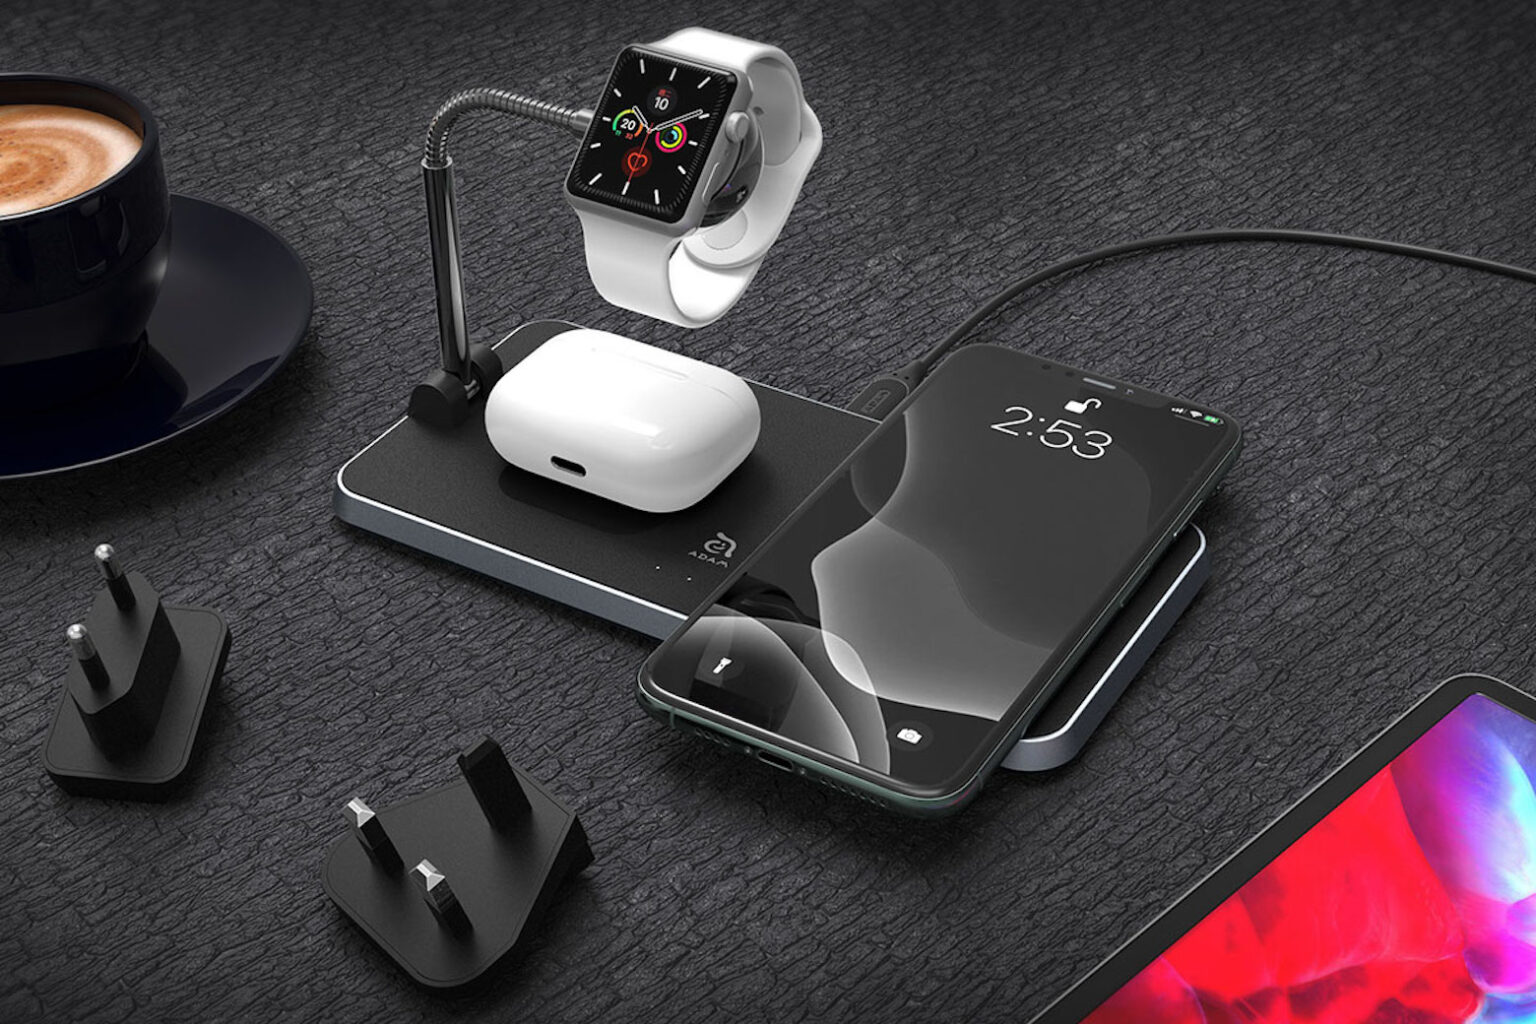 This dock can power up your smartphone, airPods & apple watch all at the same time